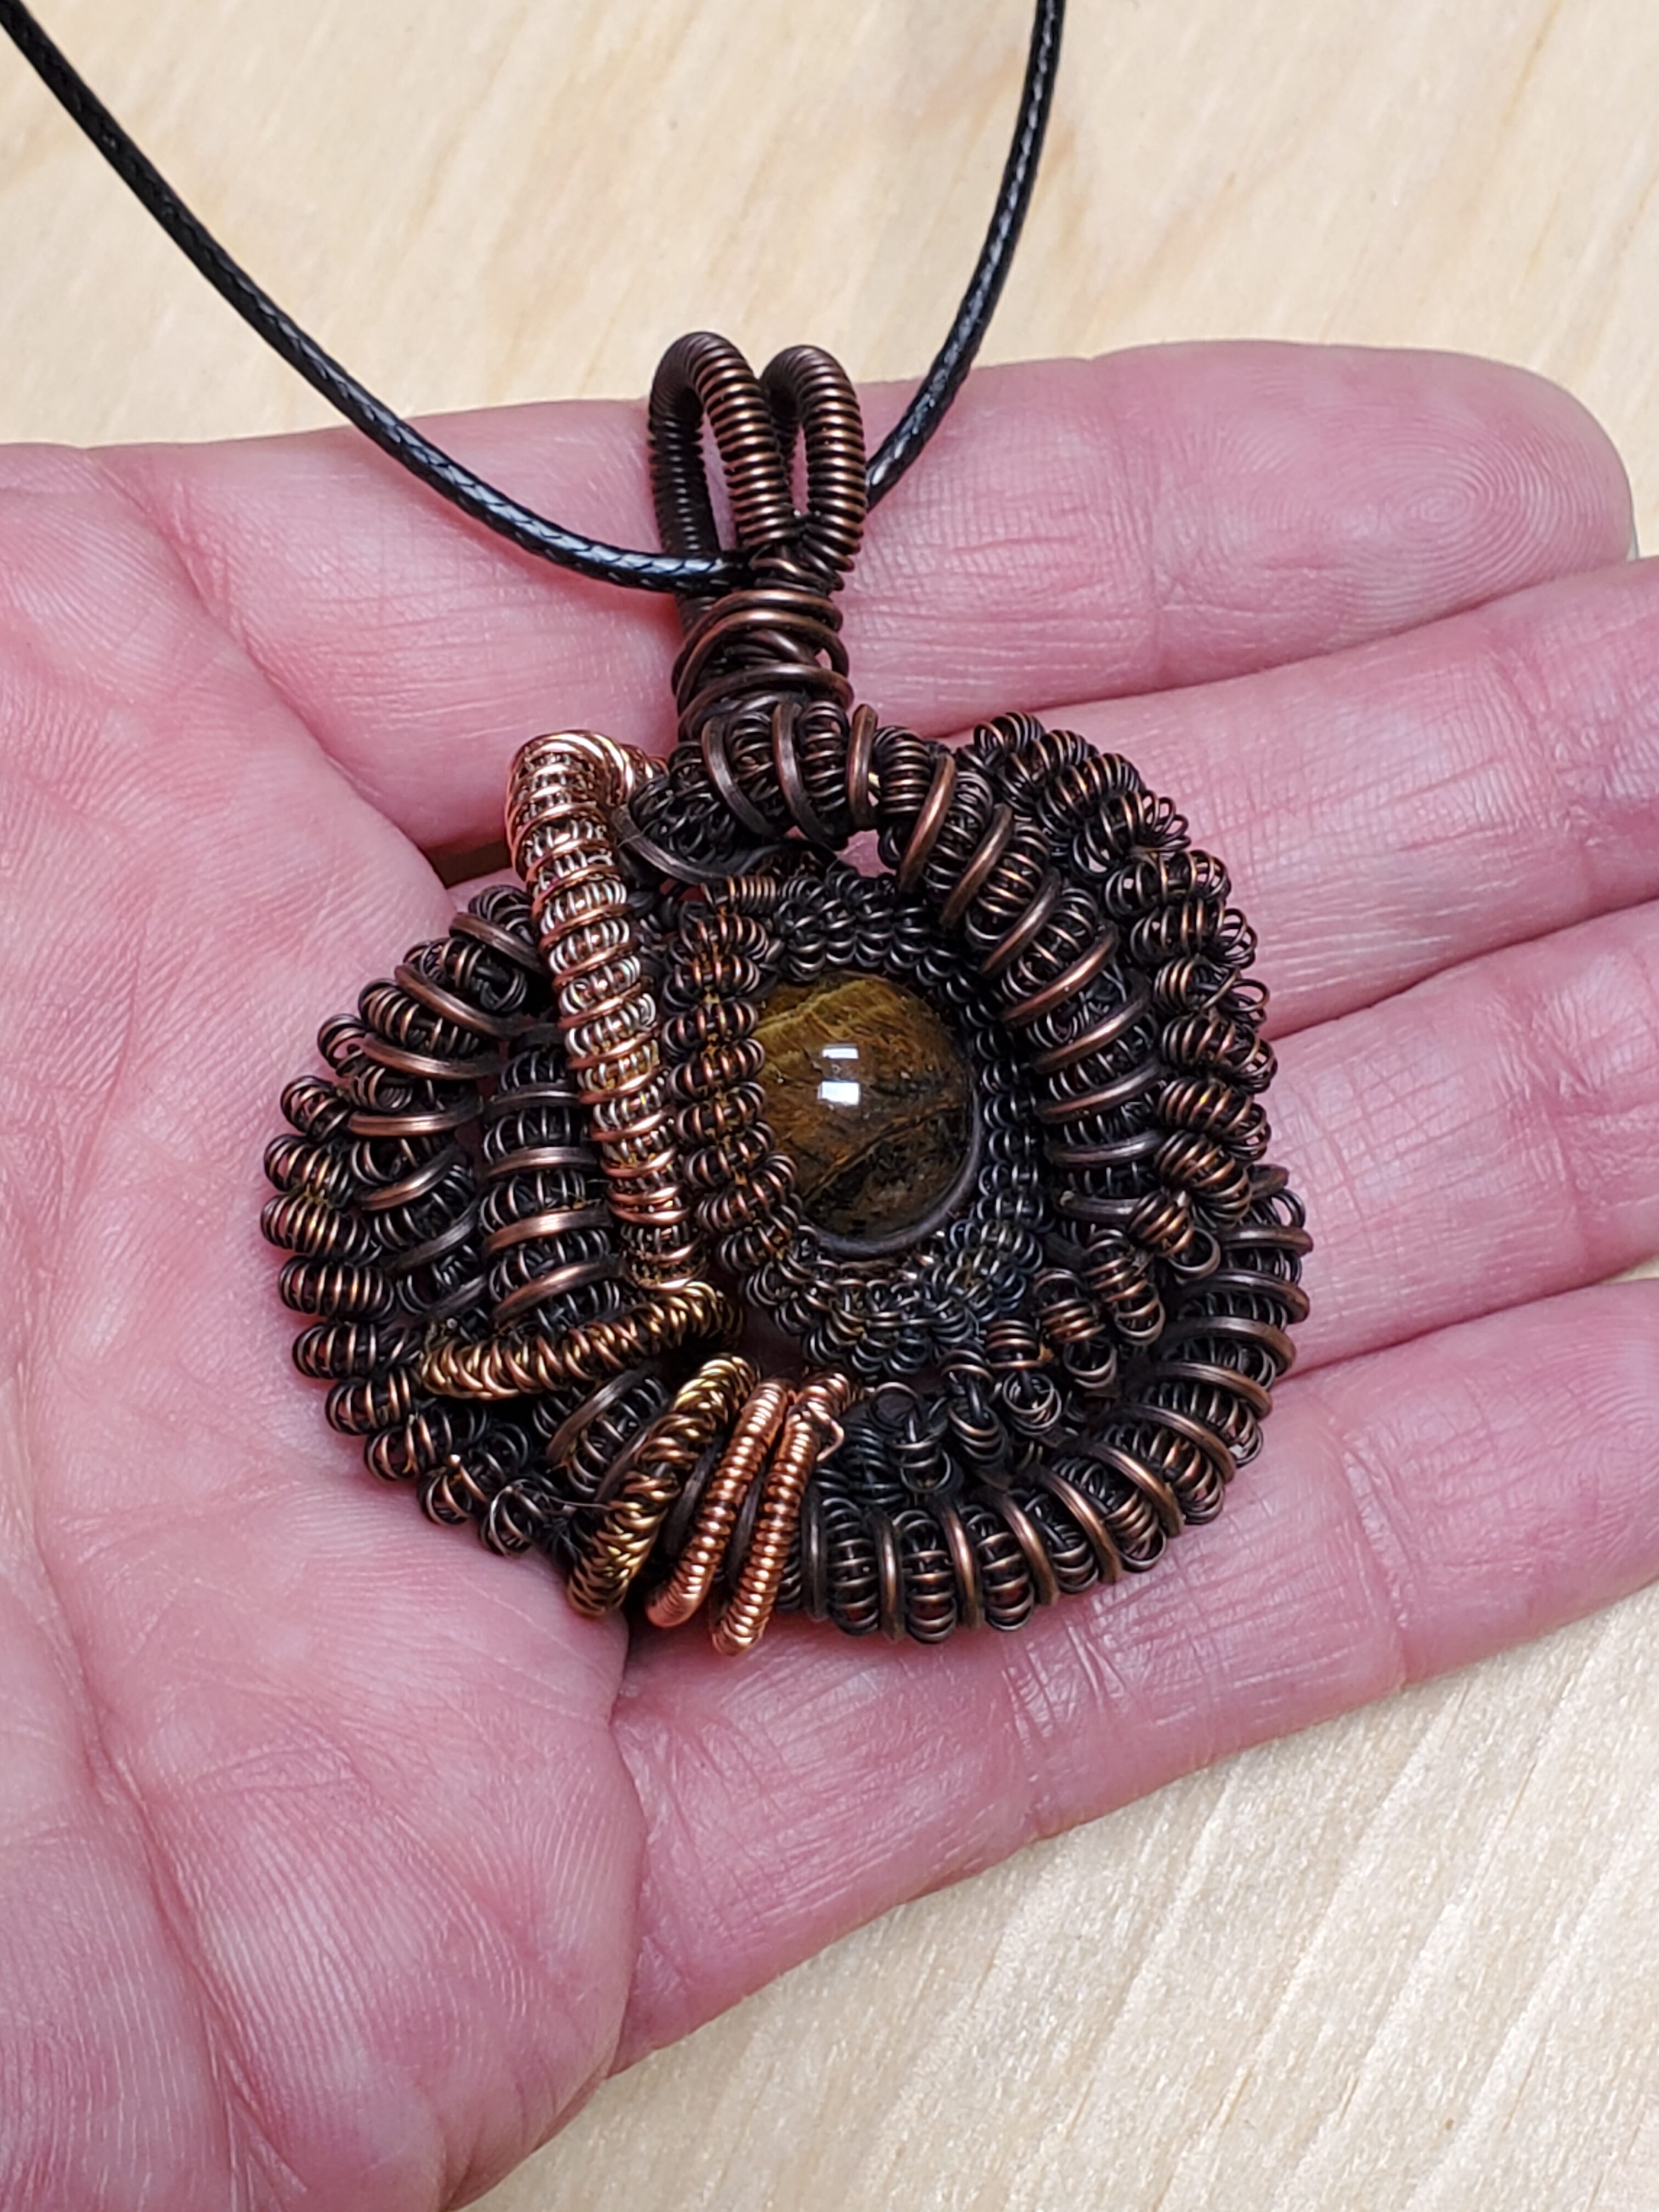 Tiger's eye, spiral, heady, chunky,jewelry, stone jewelry, gifts, wire wrap, stone, stone jewelry, spiritual, healing, unique gift